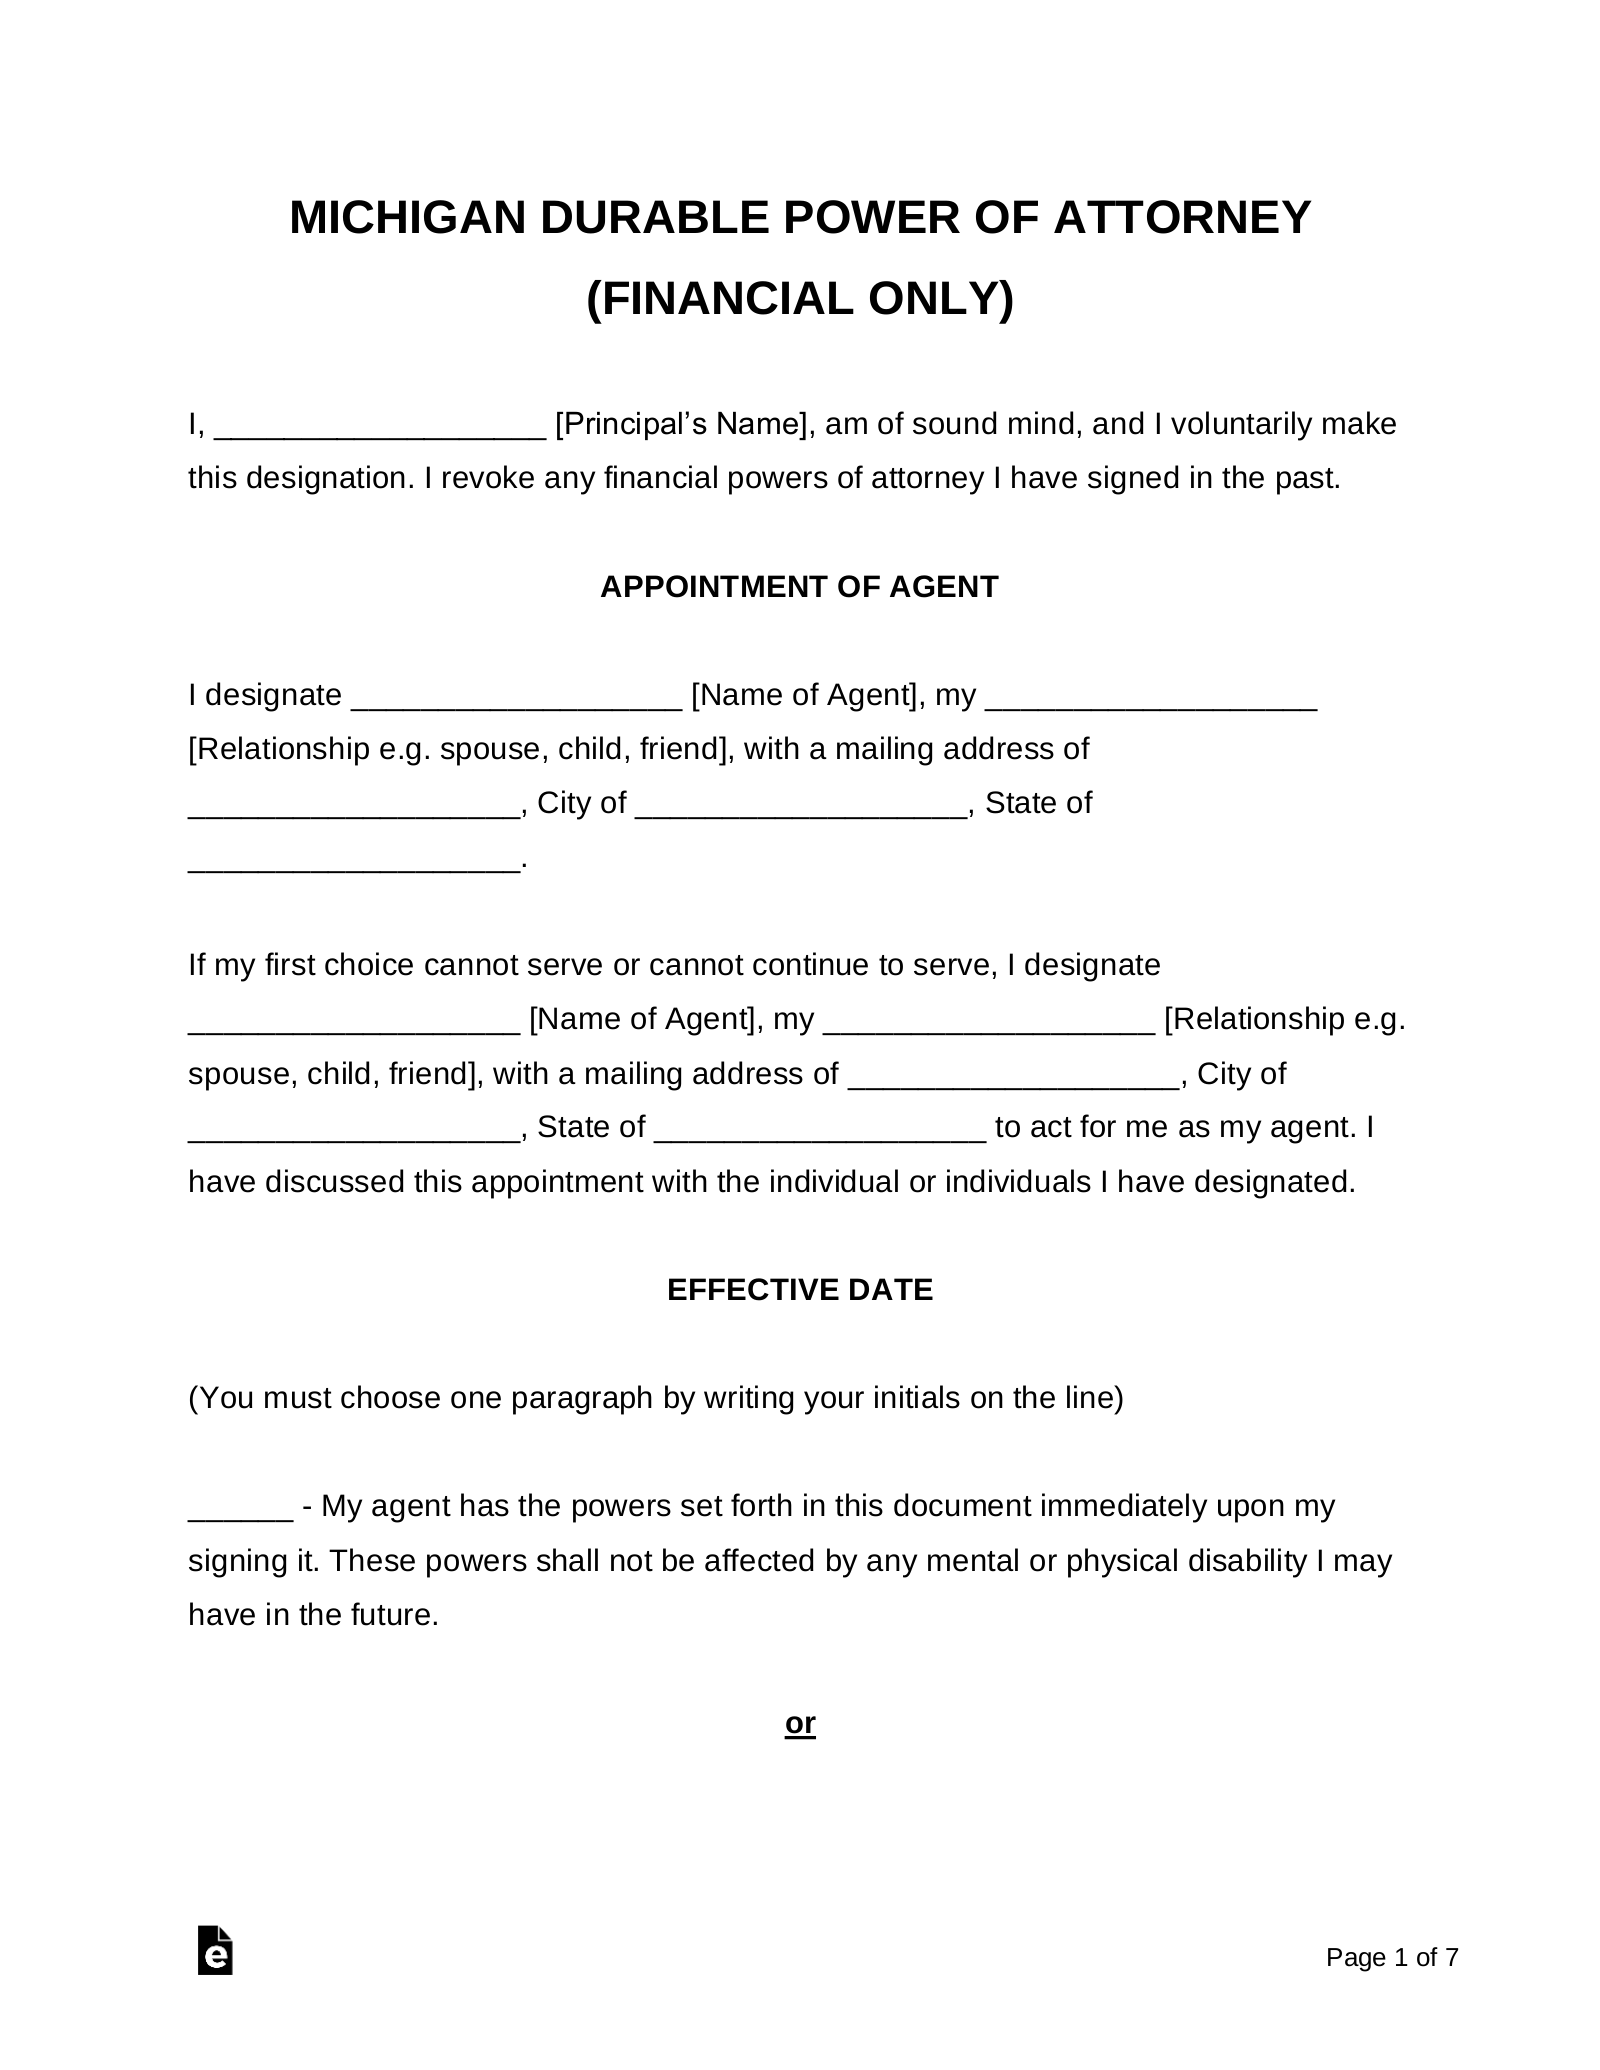 Free Michigan Durable (Financial) Power of Attorney Form PDF Word